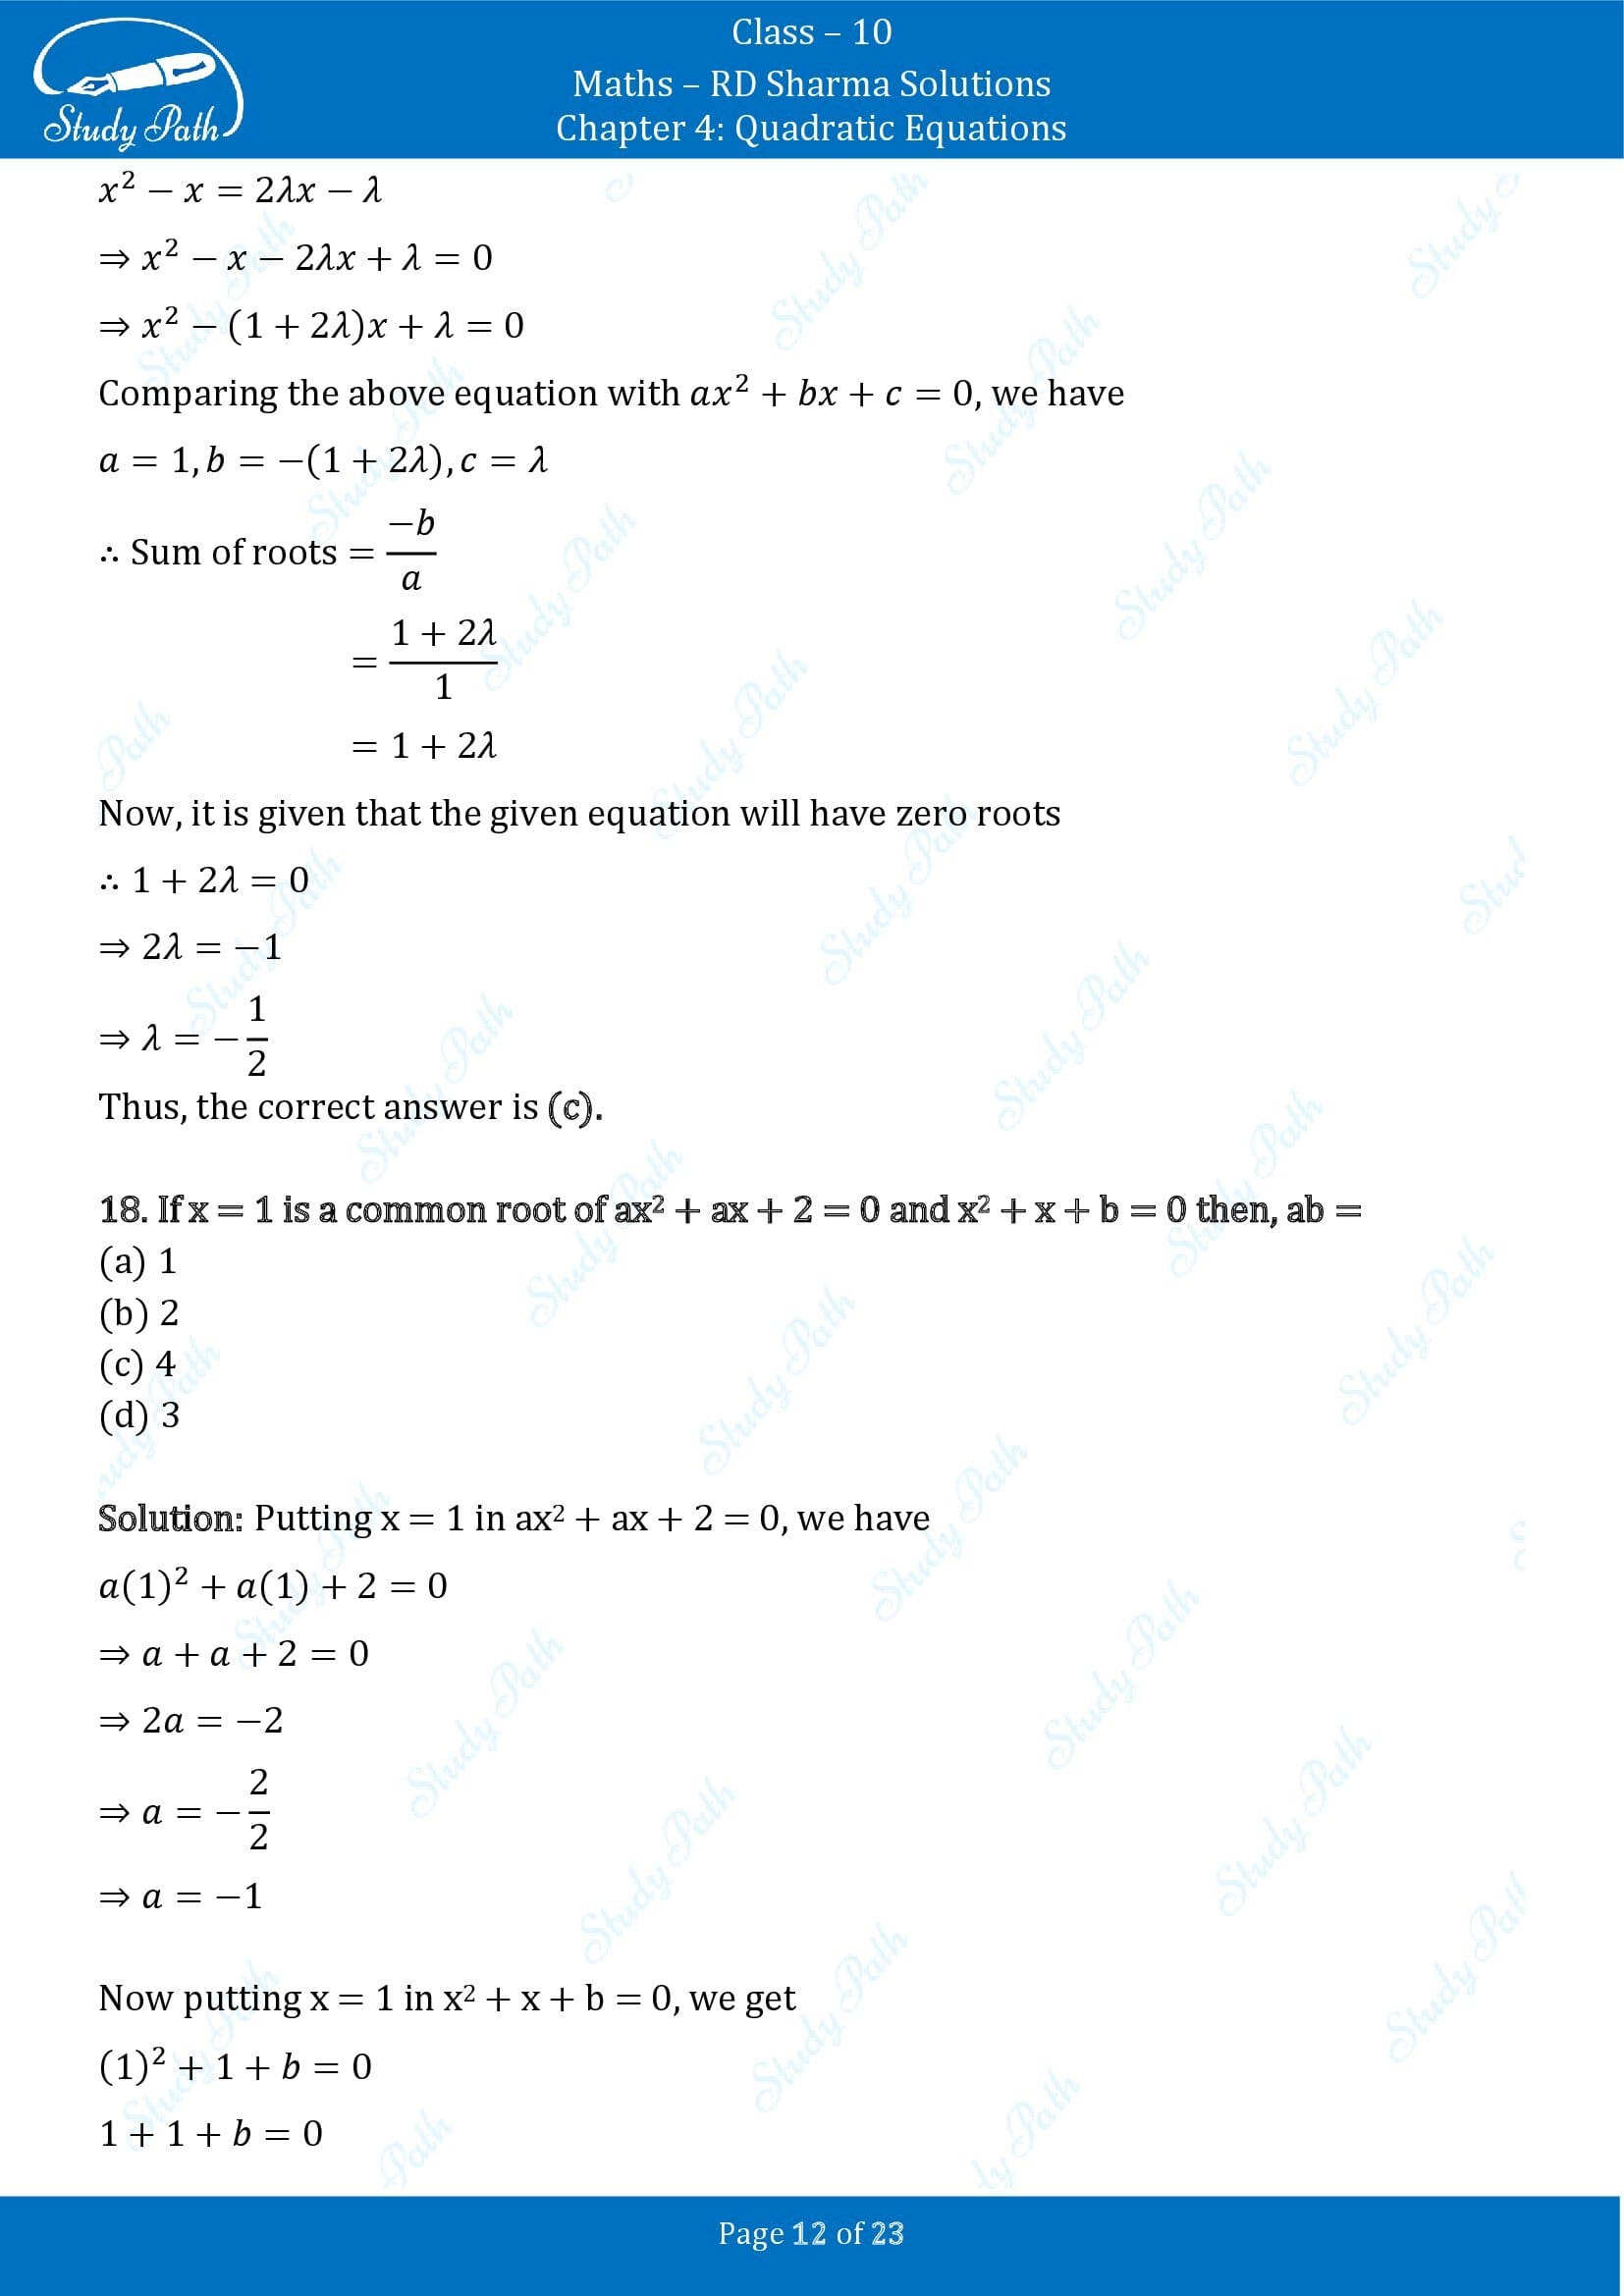 RD Sharma Solutions Class 10 Chapter 4 Quadratic Equations Multiple Choice Questions MCQs 00012